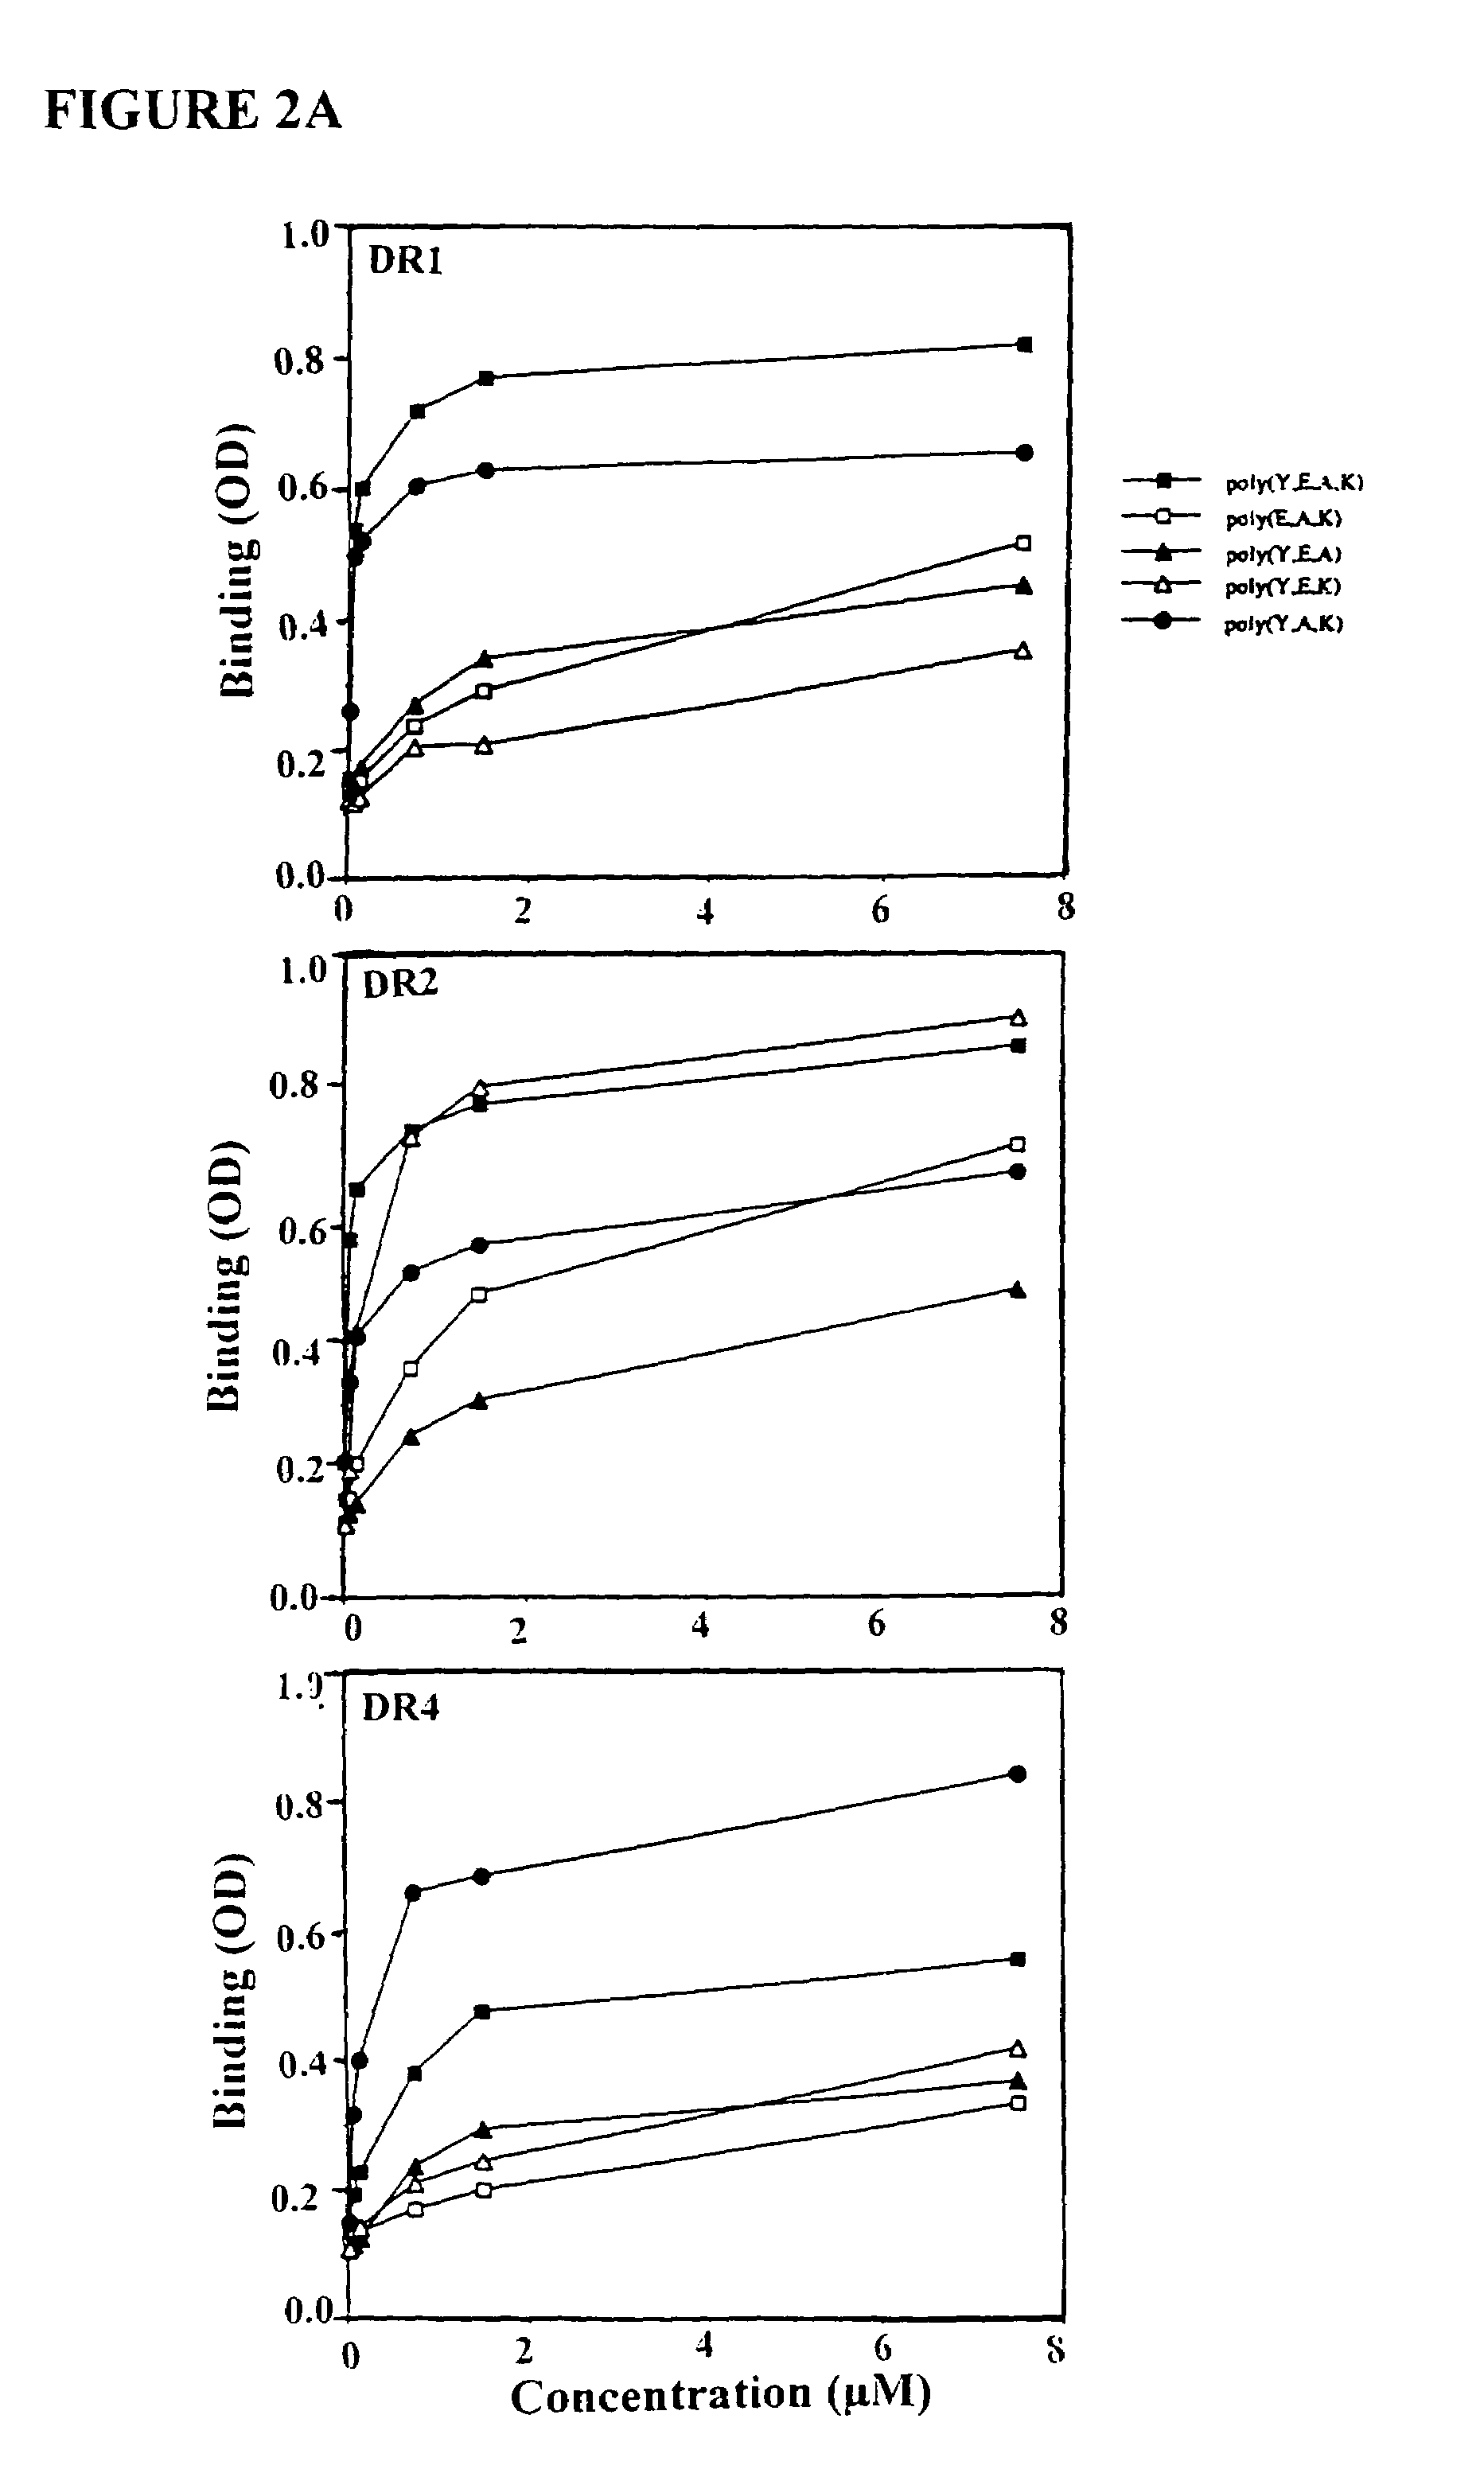 Treatment of autoimmune conditions with Copolymer 1 and related Copolymers